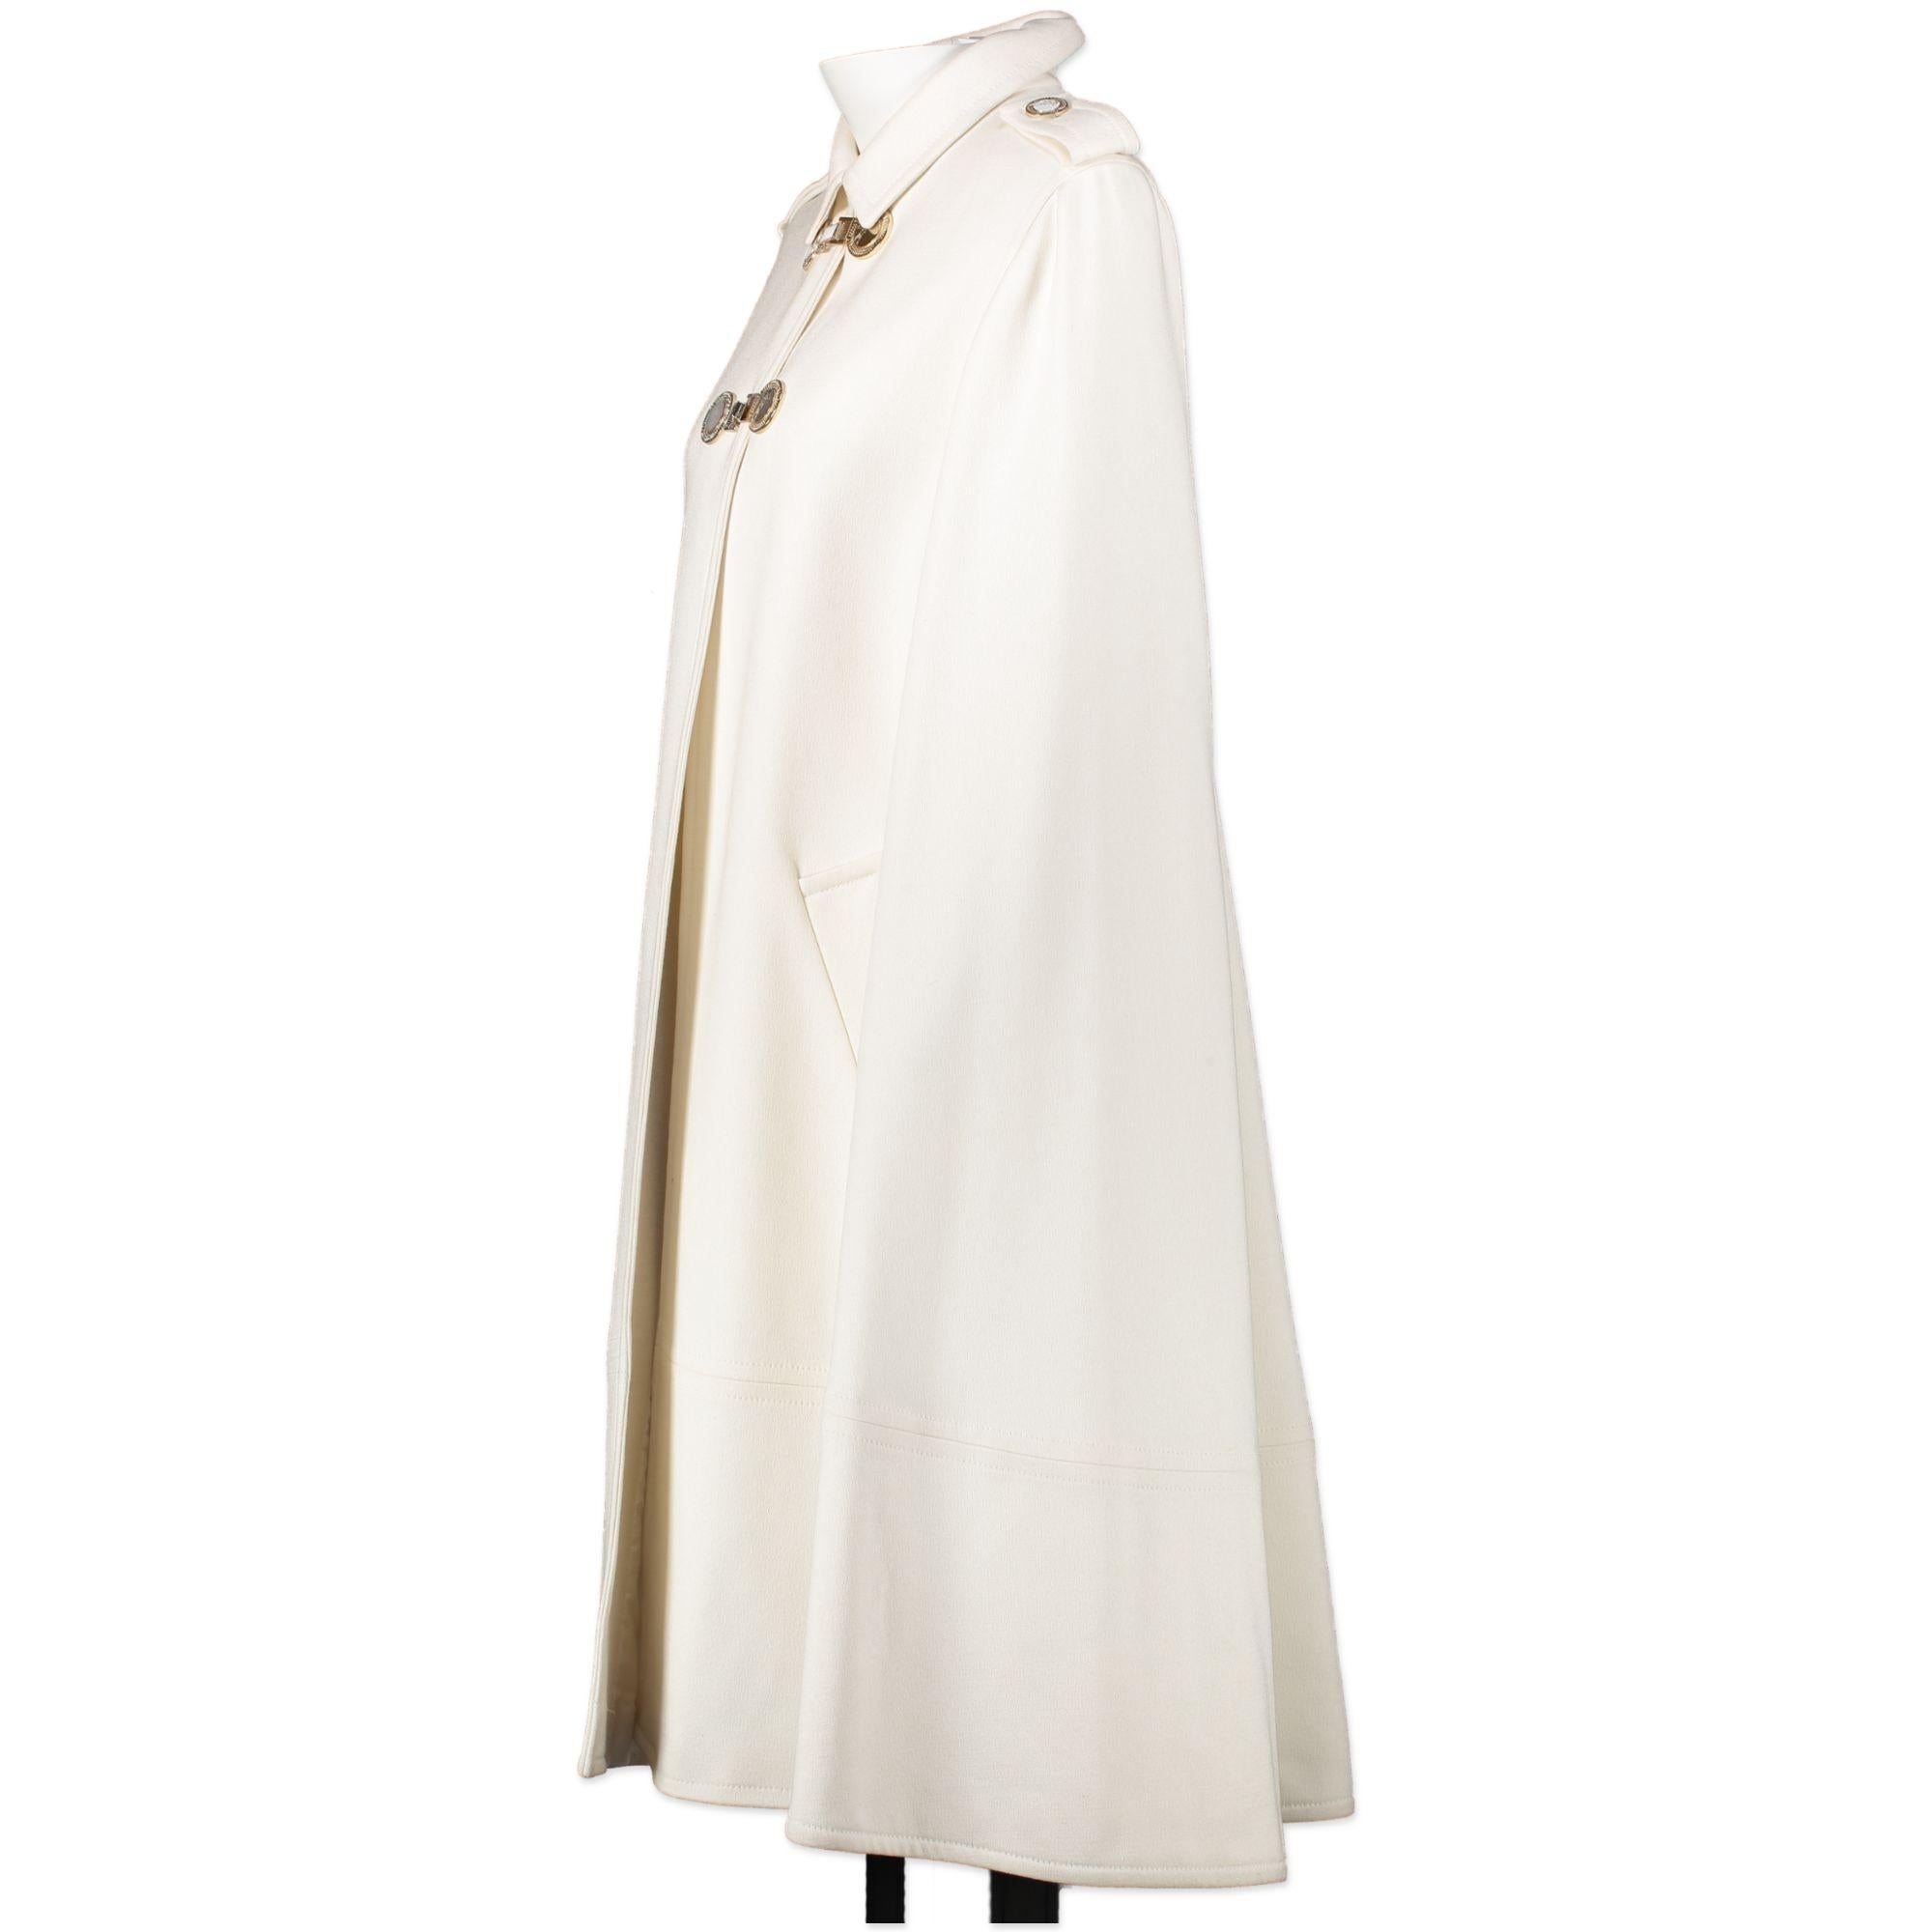 Good preloved condition 

Versace White Cape - IT44

If you want to make an electrifying statement, Versace has got you covered. A white cape that features gold-toned buttons that will give your outfit a cool and classic touch. 

The perfect coat